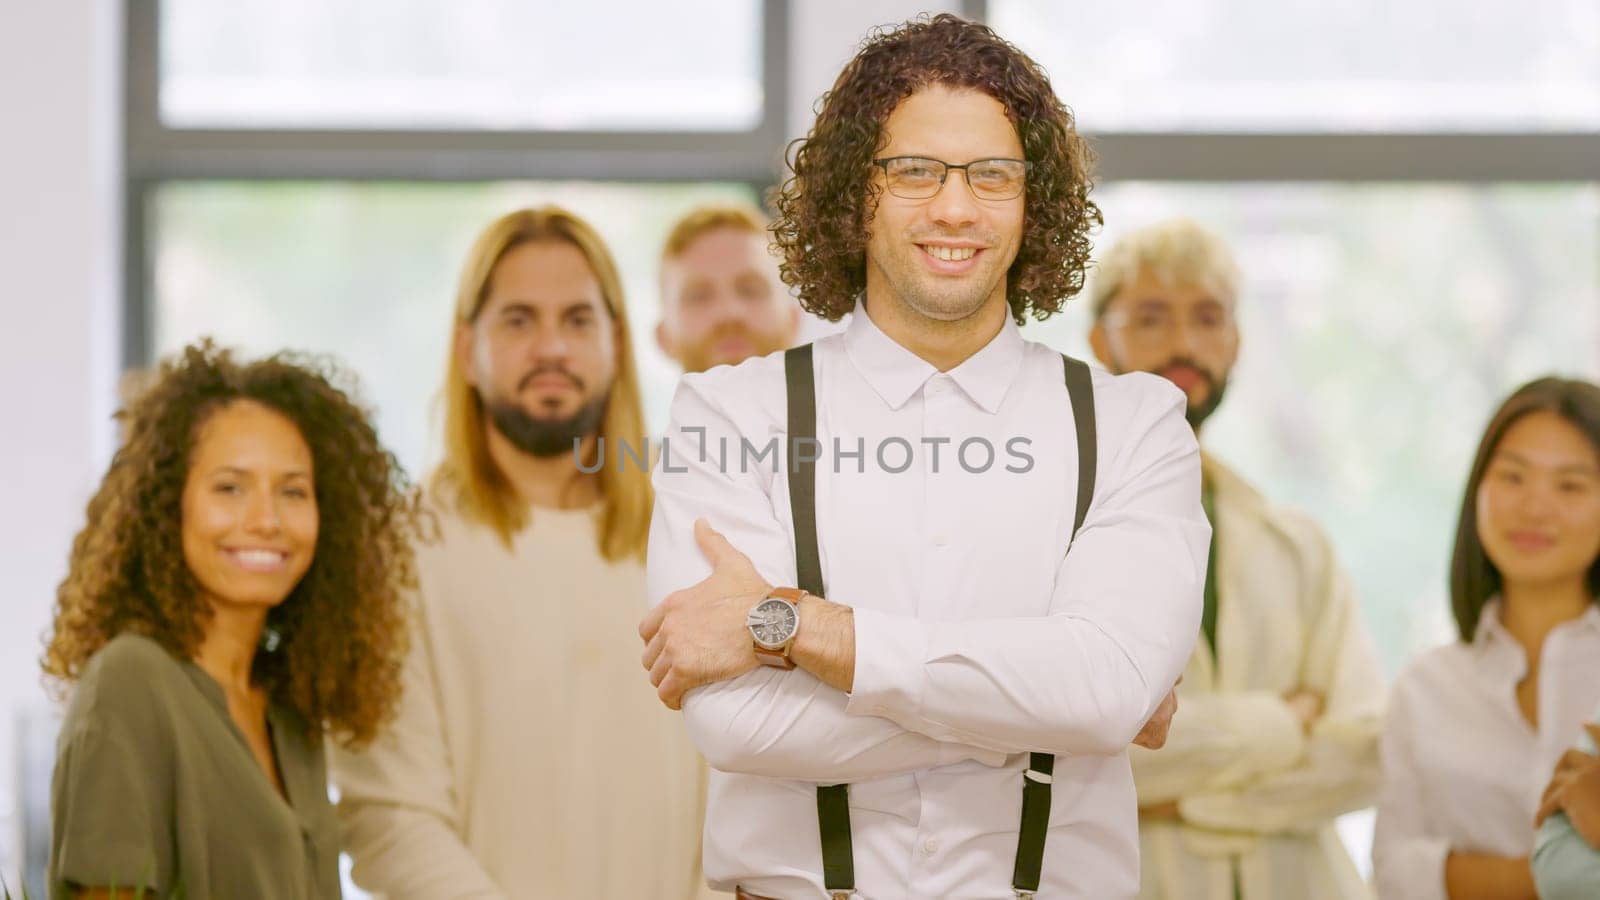 Man standing in front of his work team in the office